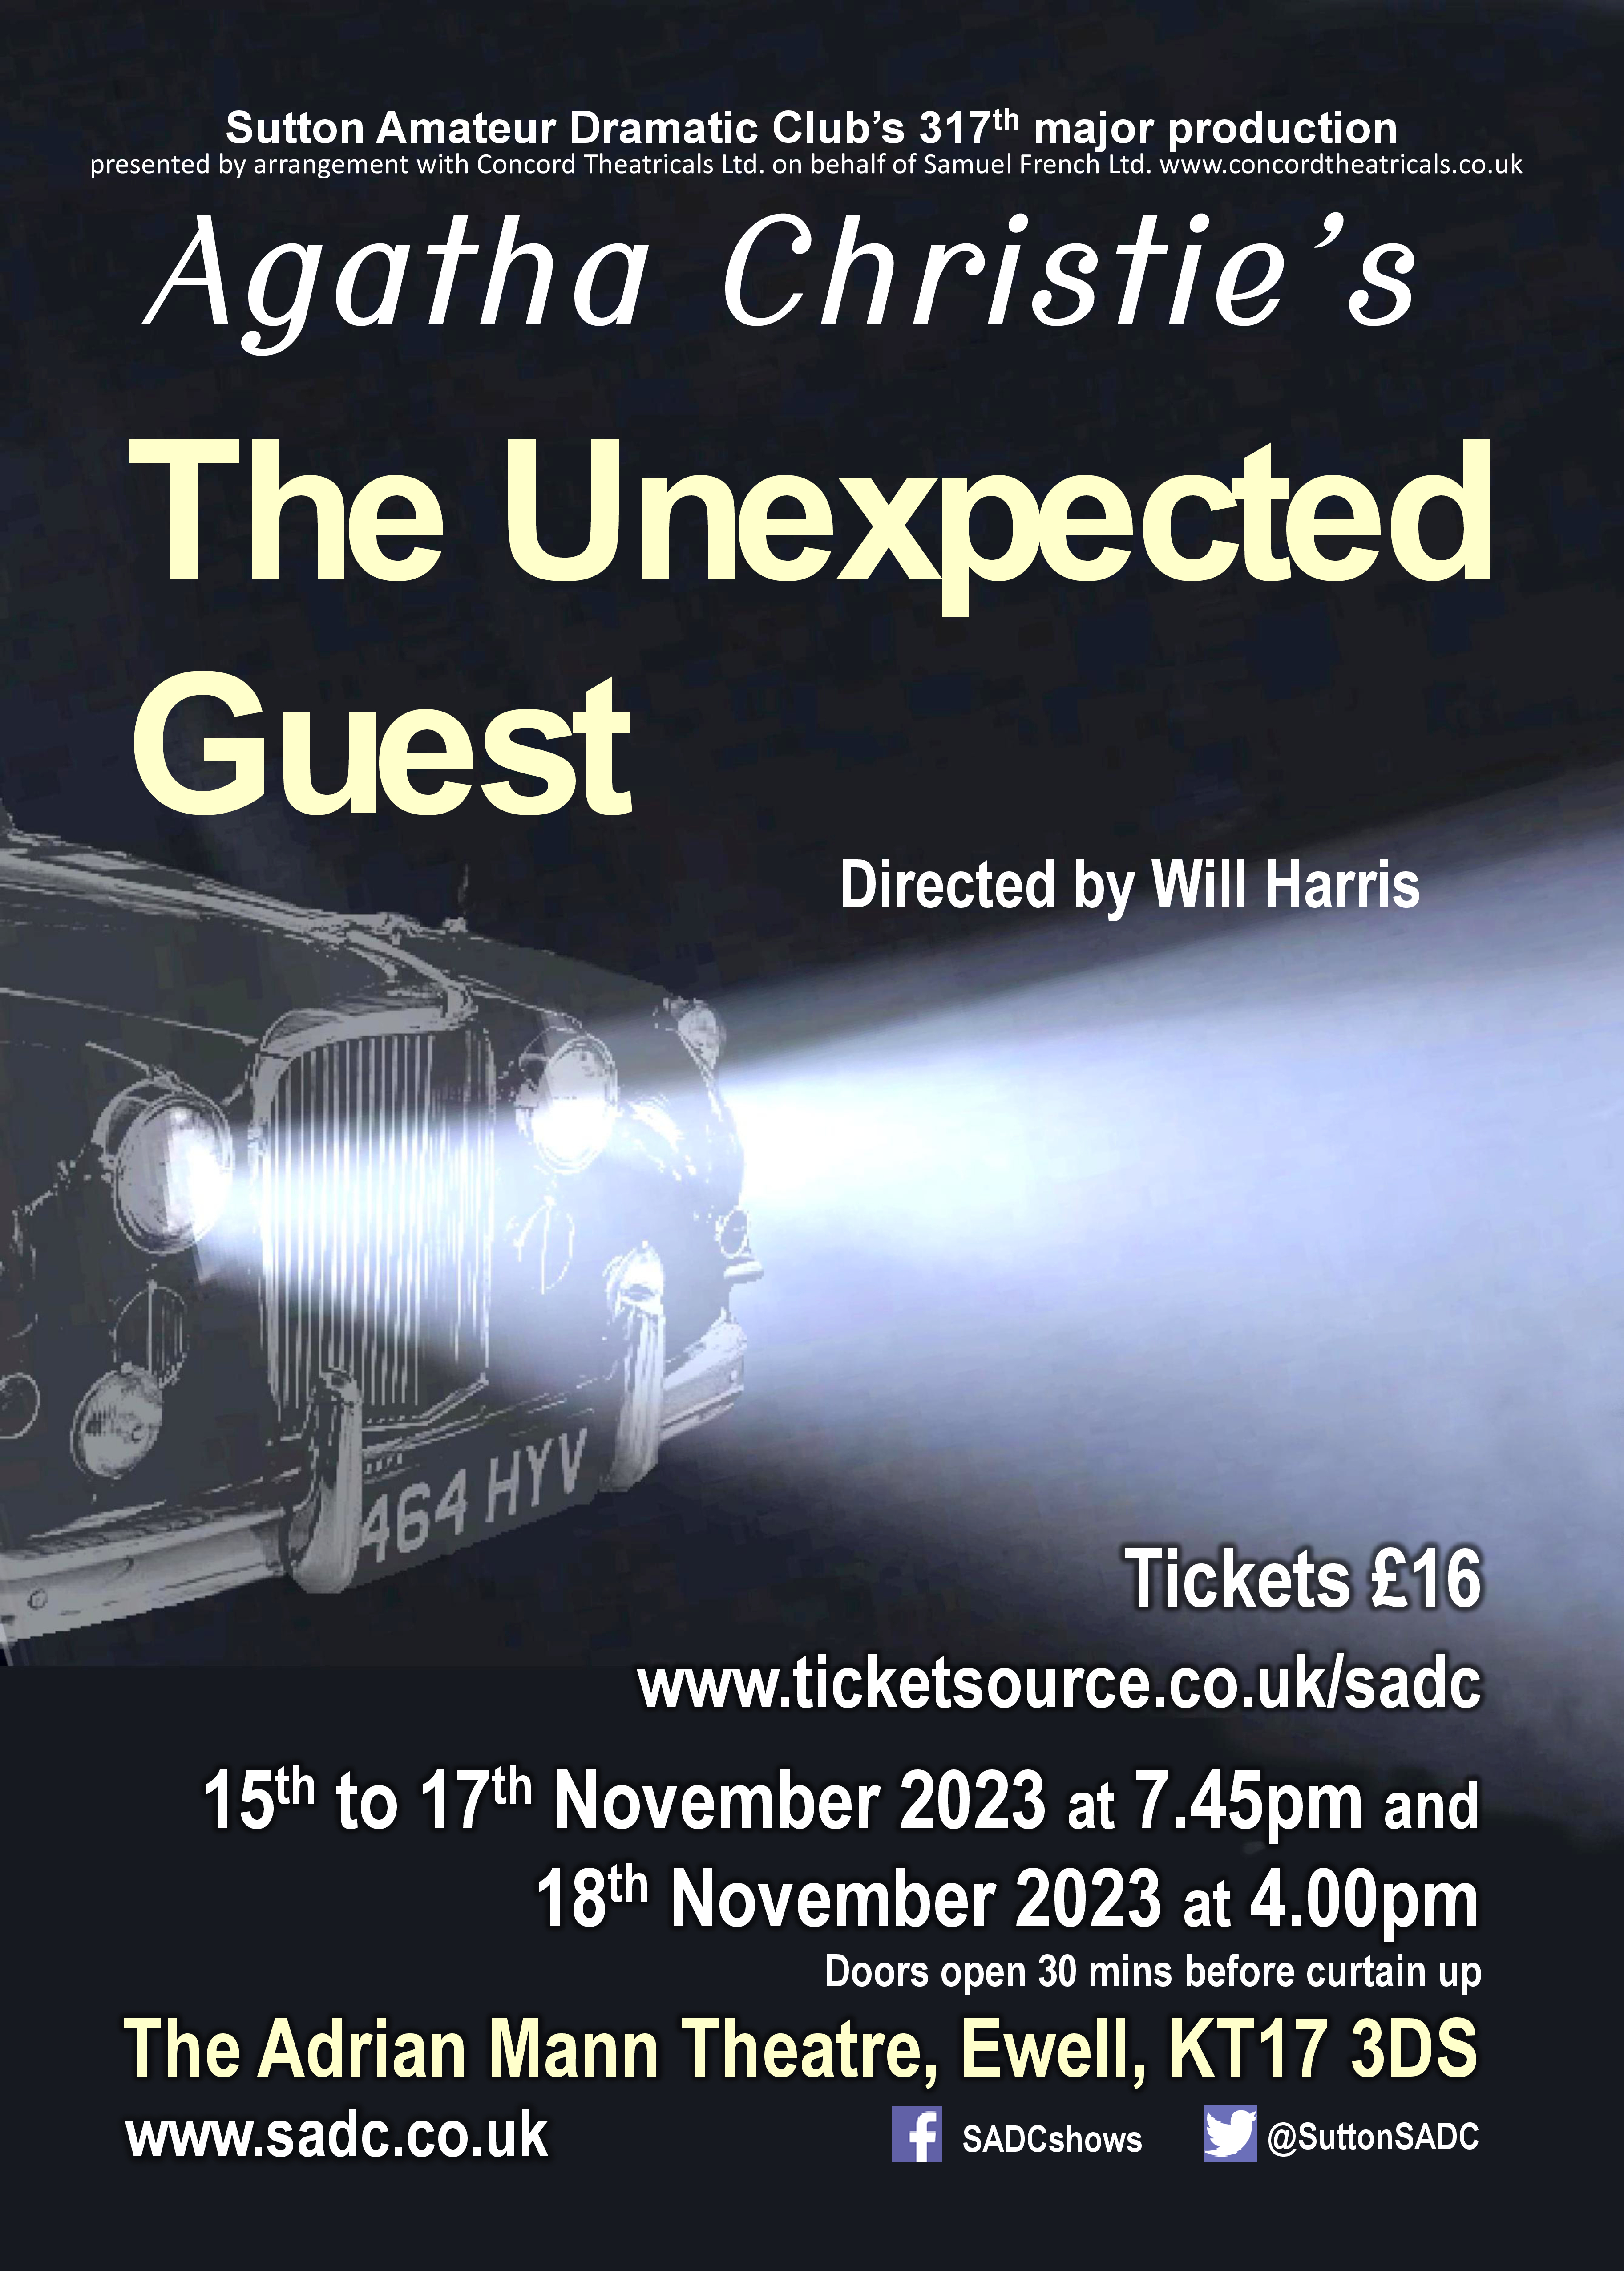 Poster image for The Unexpected Guest - a car's headlights loom out of the fog